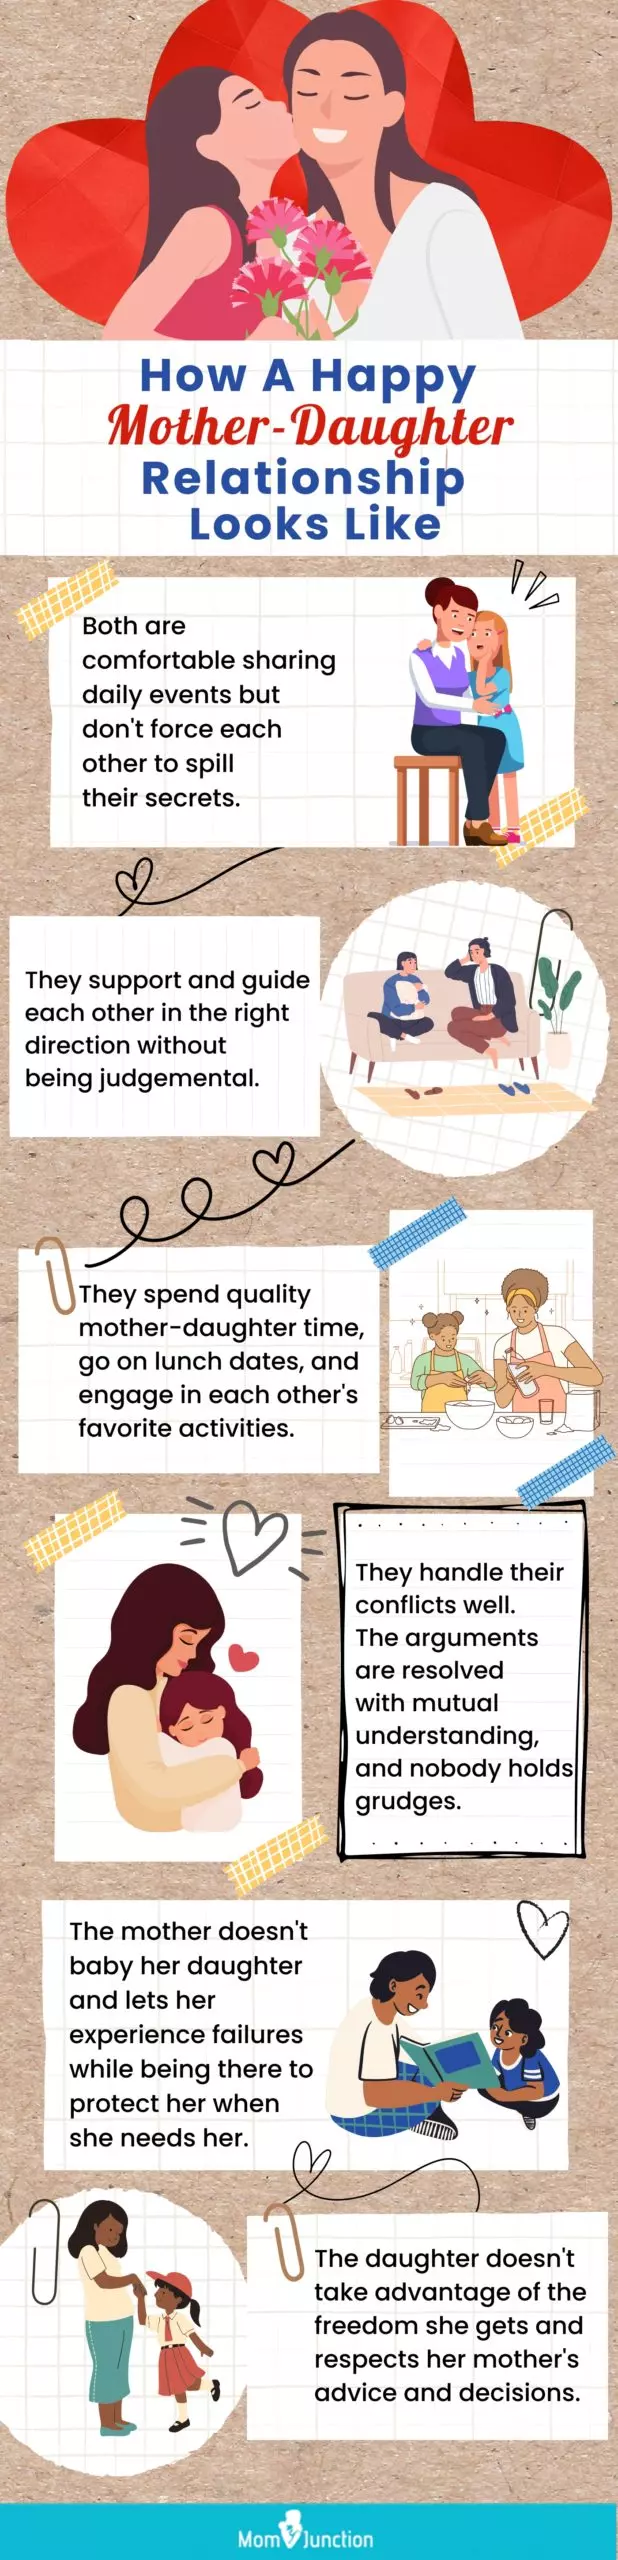 how a happy mother daughter relationship looks like (infographic)